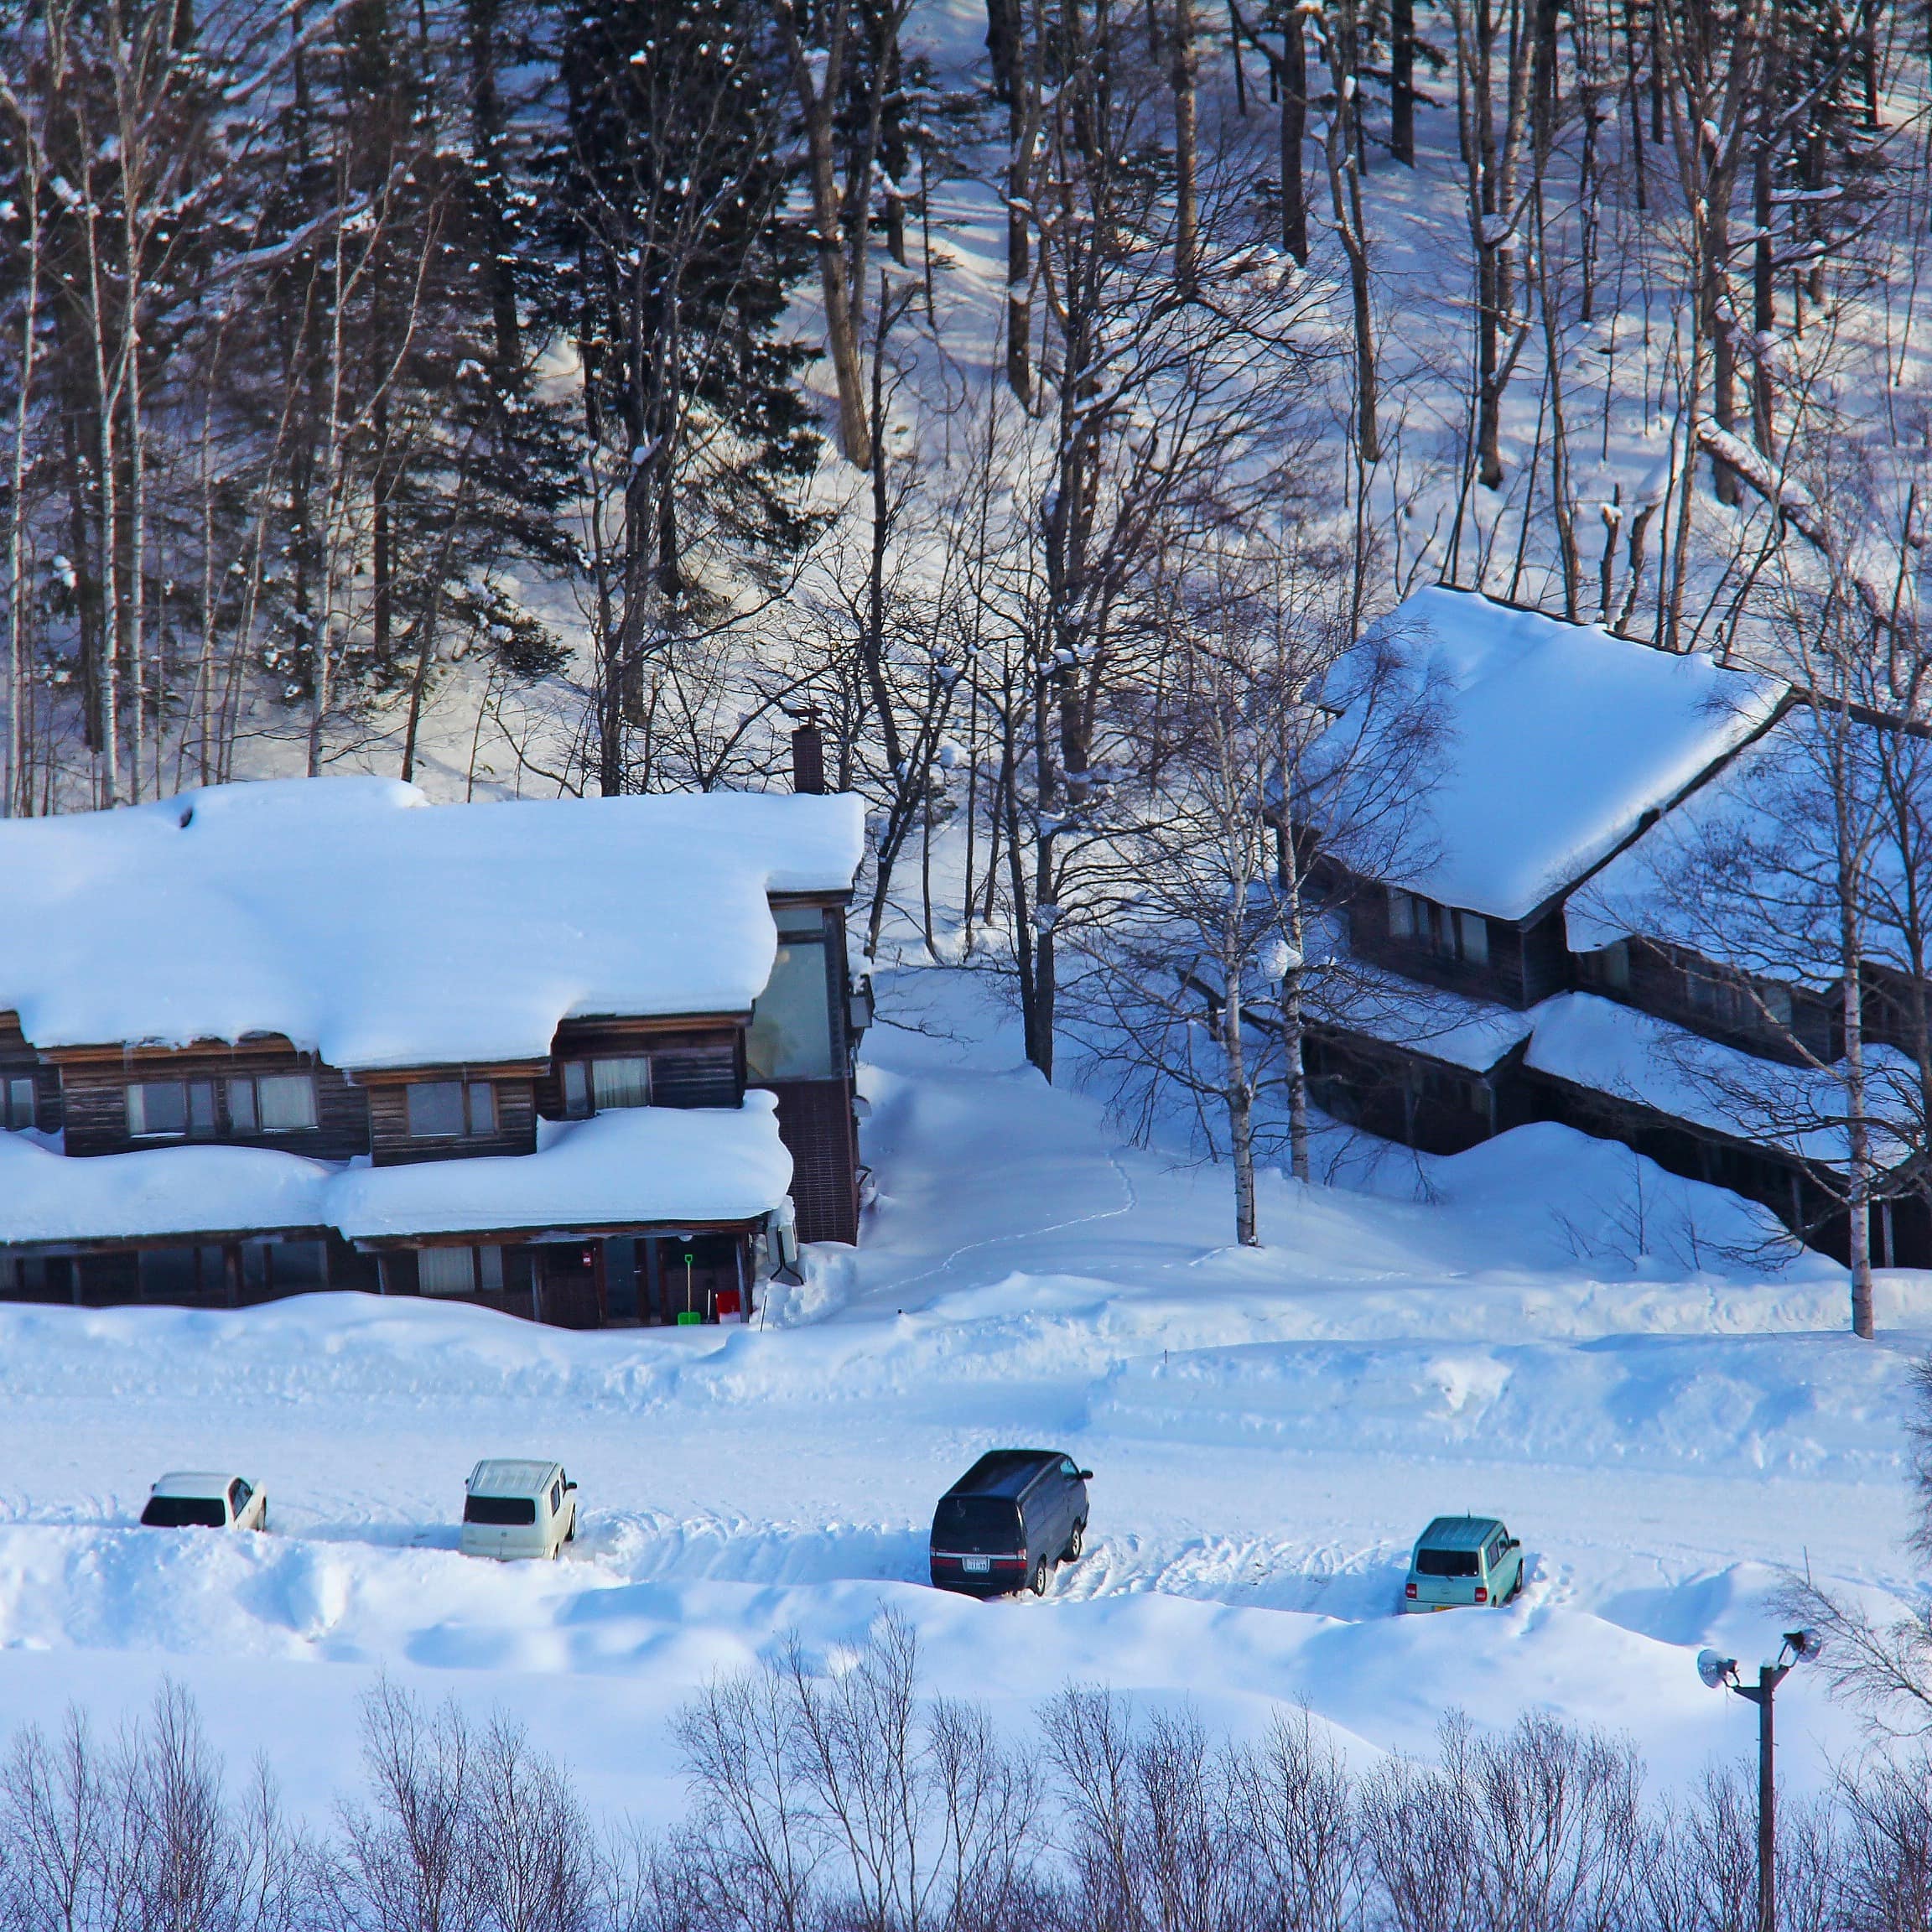 Ski chalets surrounded by snow, seen from above